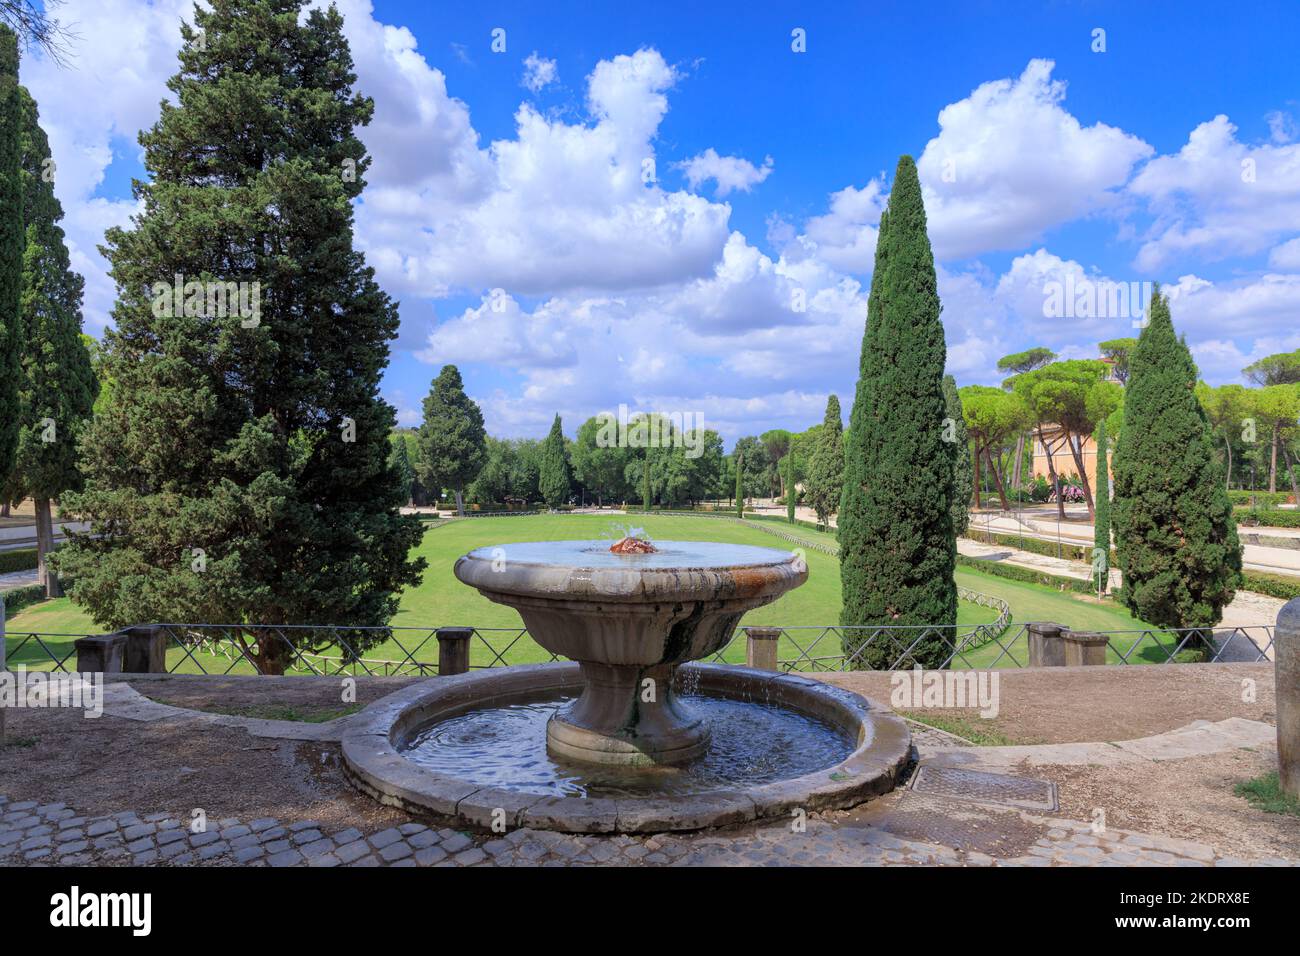 Villa borghese Garden in Rome, Italy: view of Puppet Fountain with Piazza di Siena in the background. Stock Photo